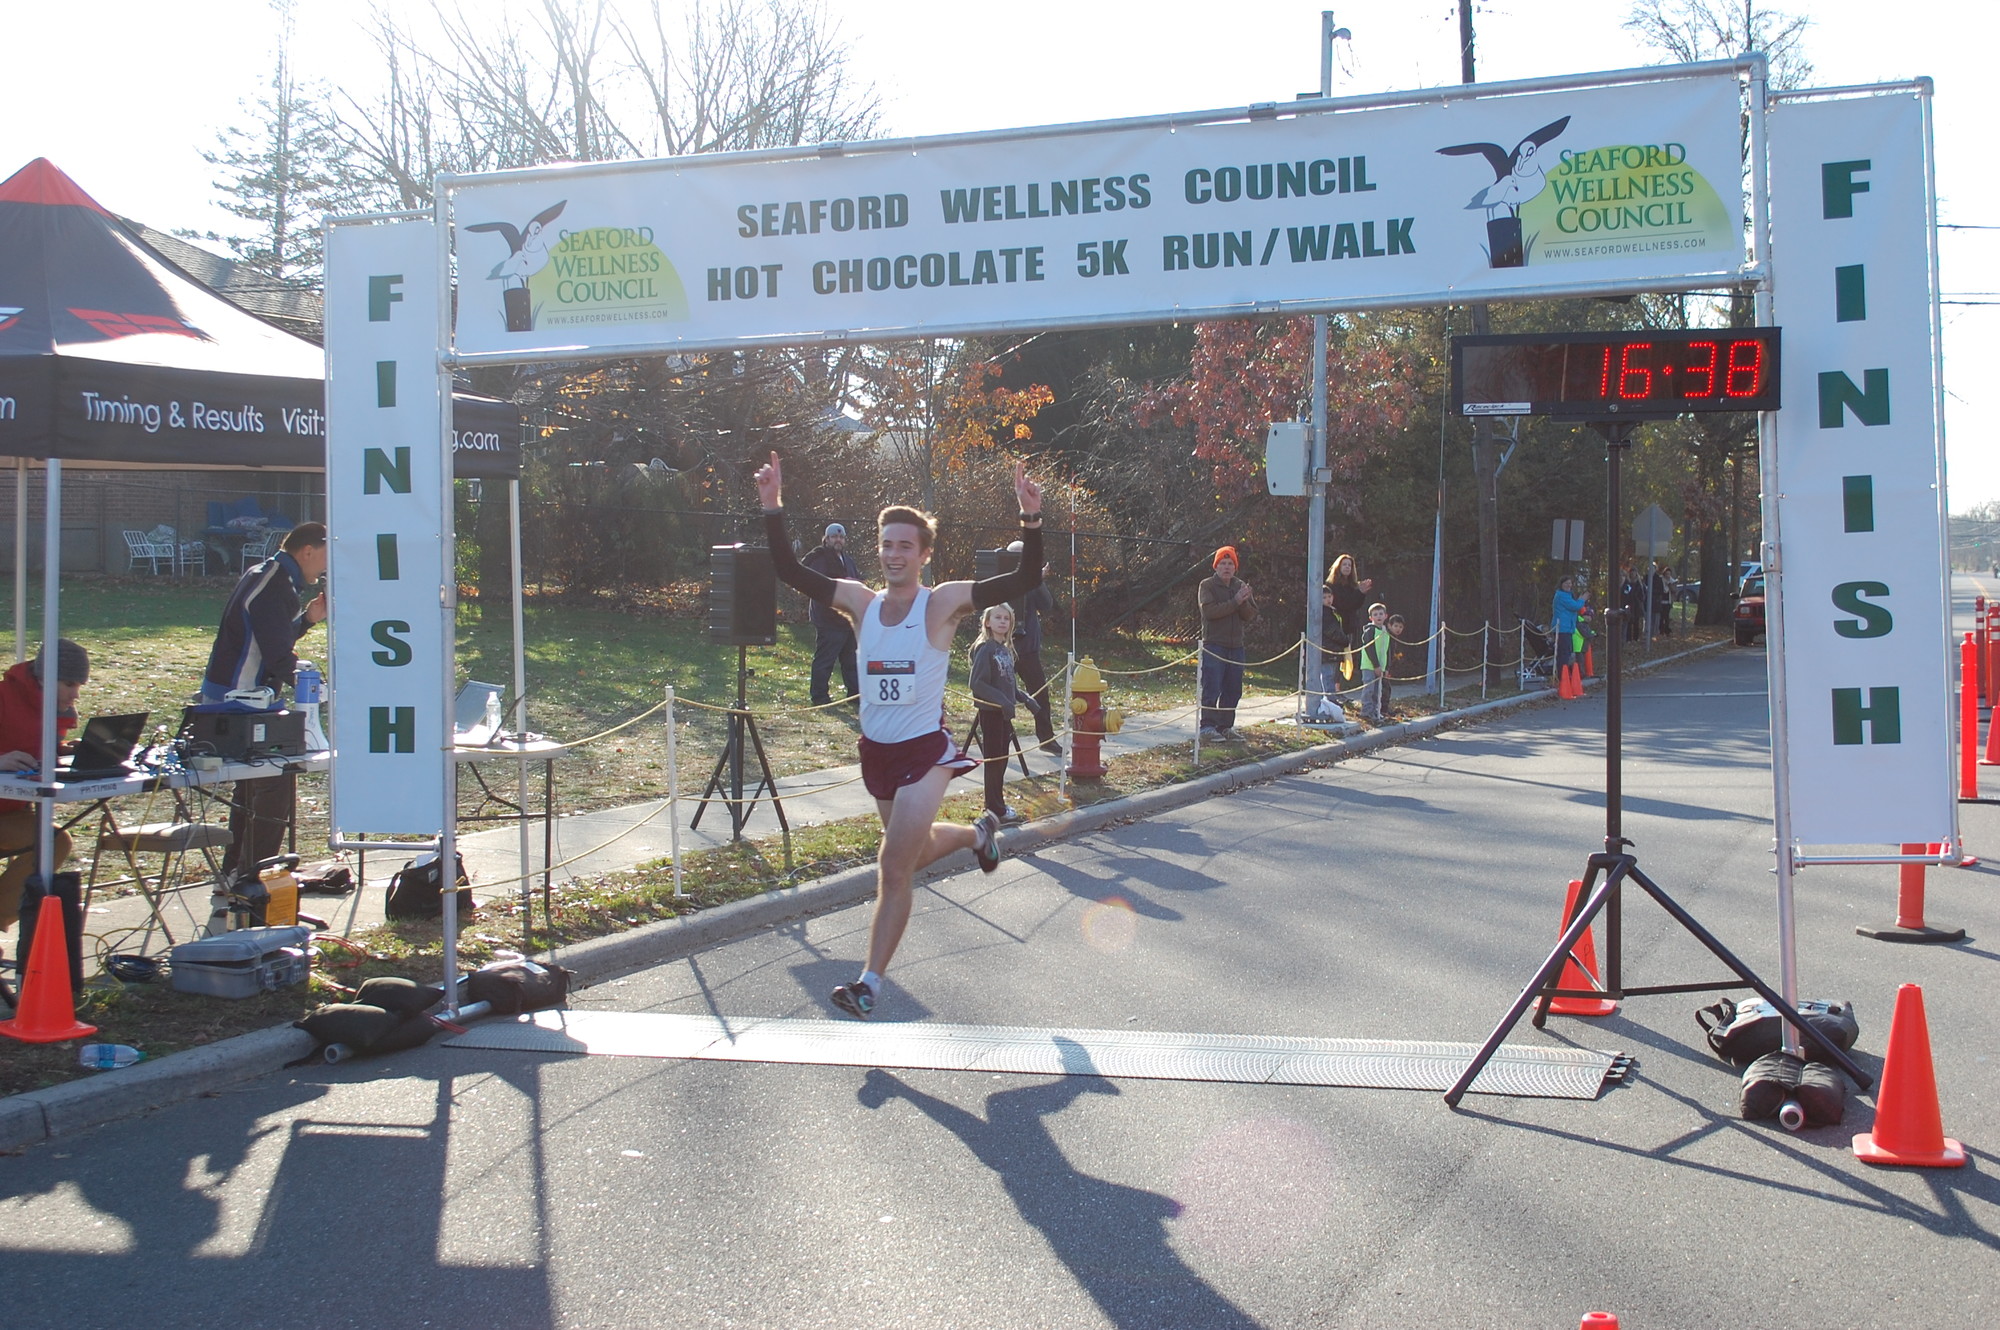 Patrick Burke, 23, of Seaford, was the winner of Saturday’s 12th annual Hot Chocolate Run.